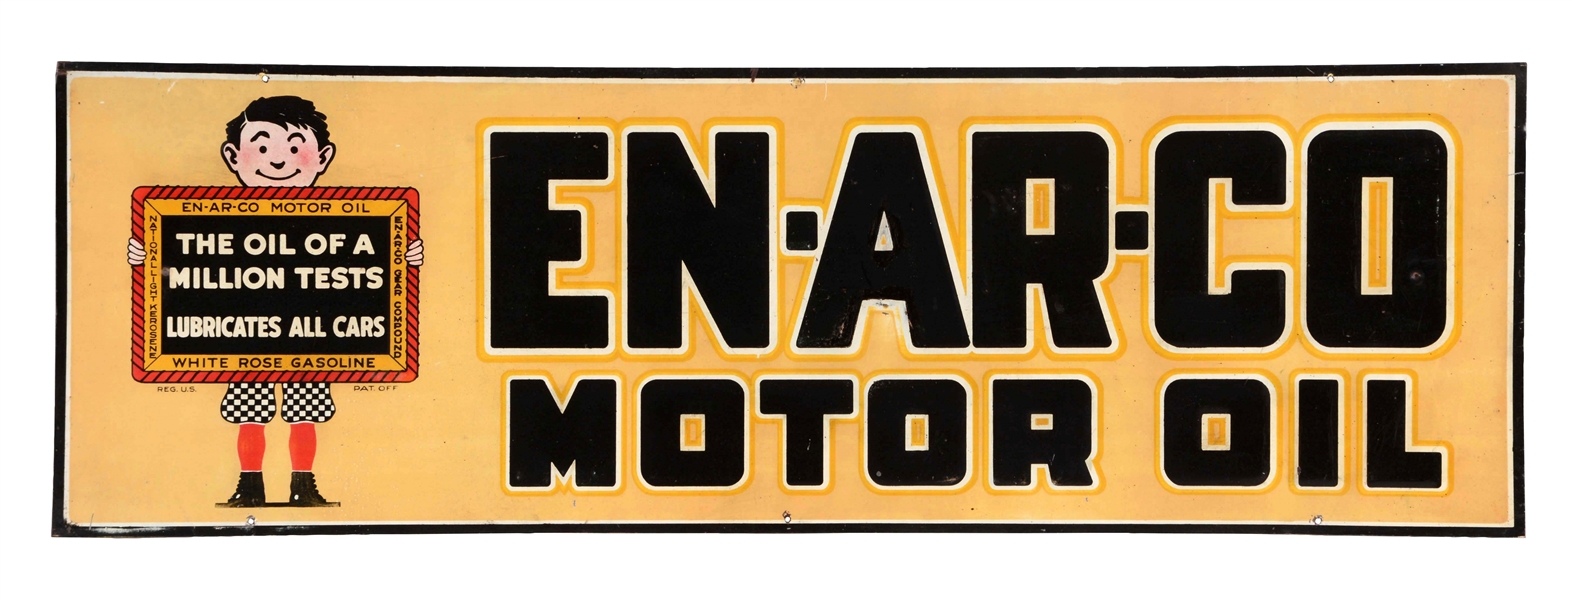 ENARCO MOTOR OIL EMBOSSED TIN SIGN WITH BOY & CHALKBOARD GRAPHIC.